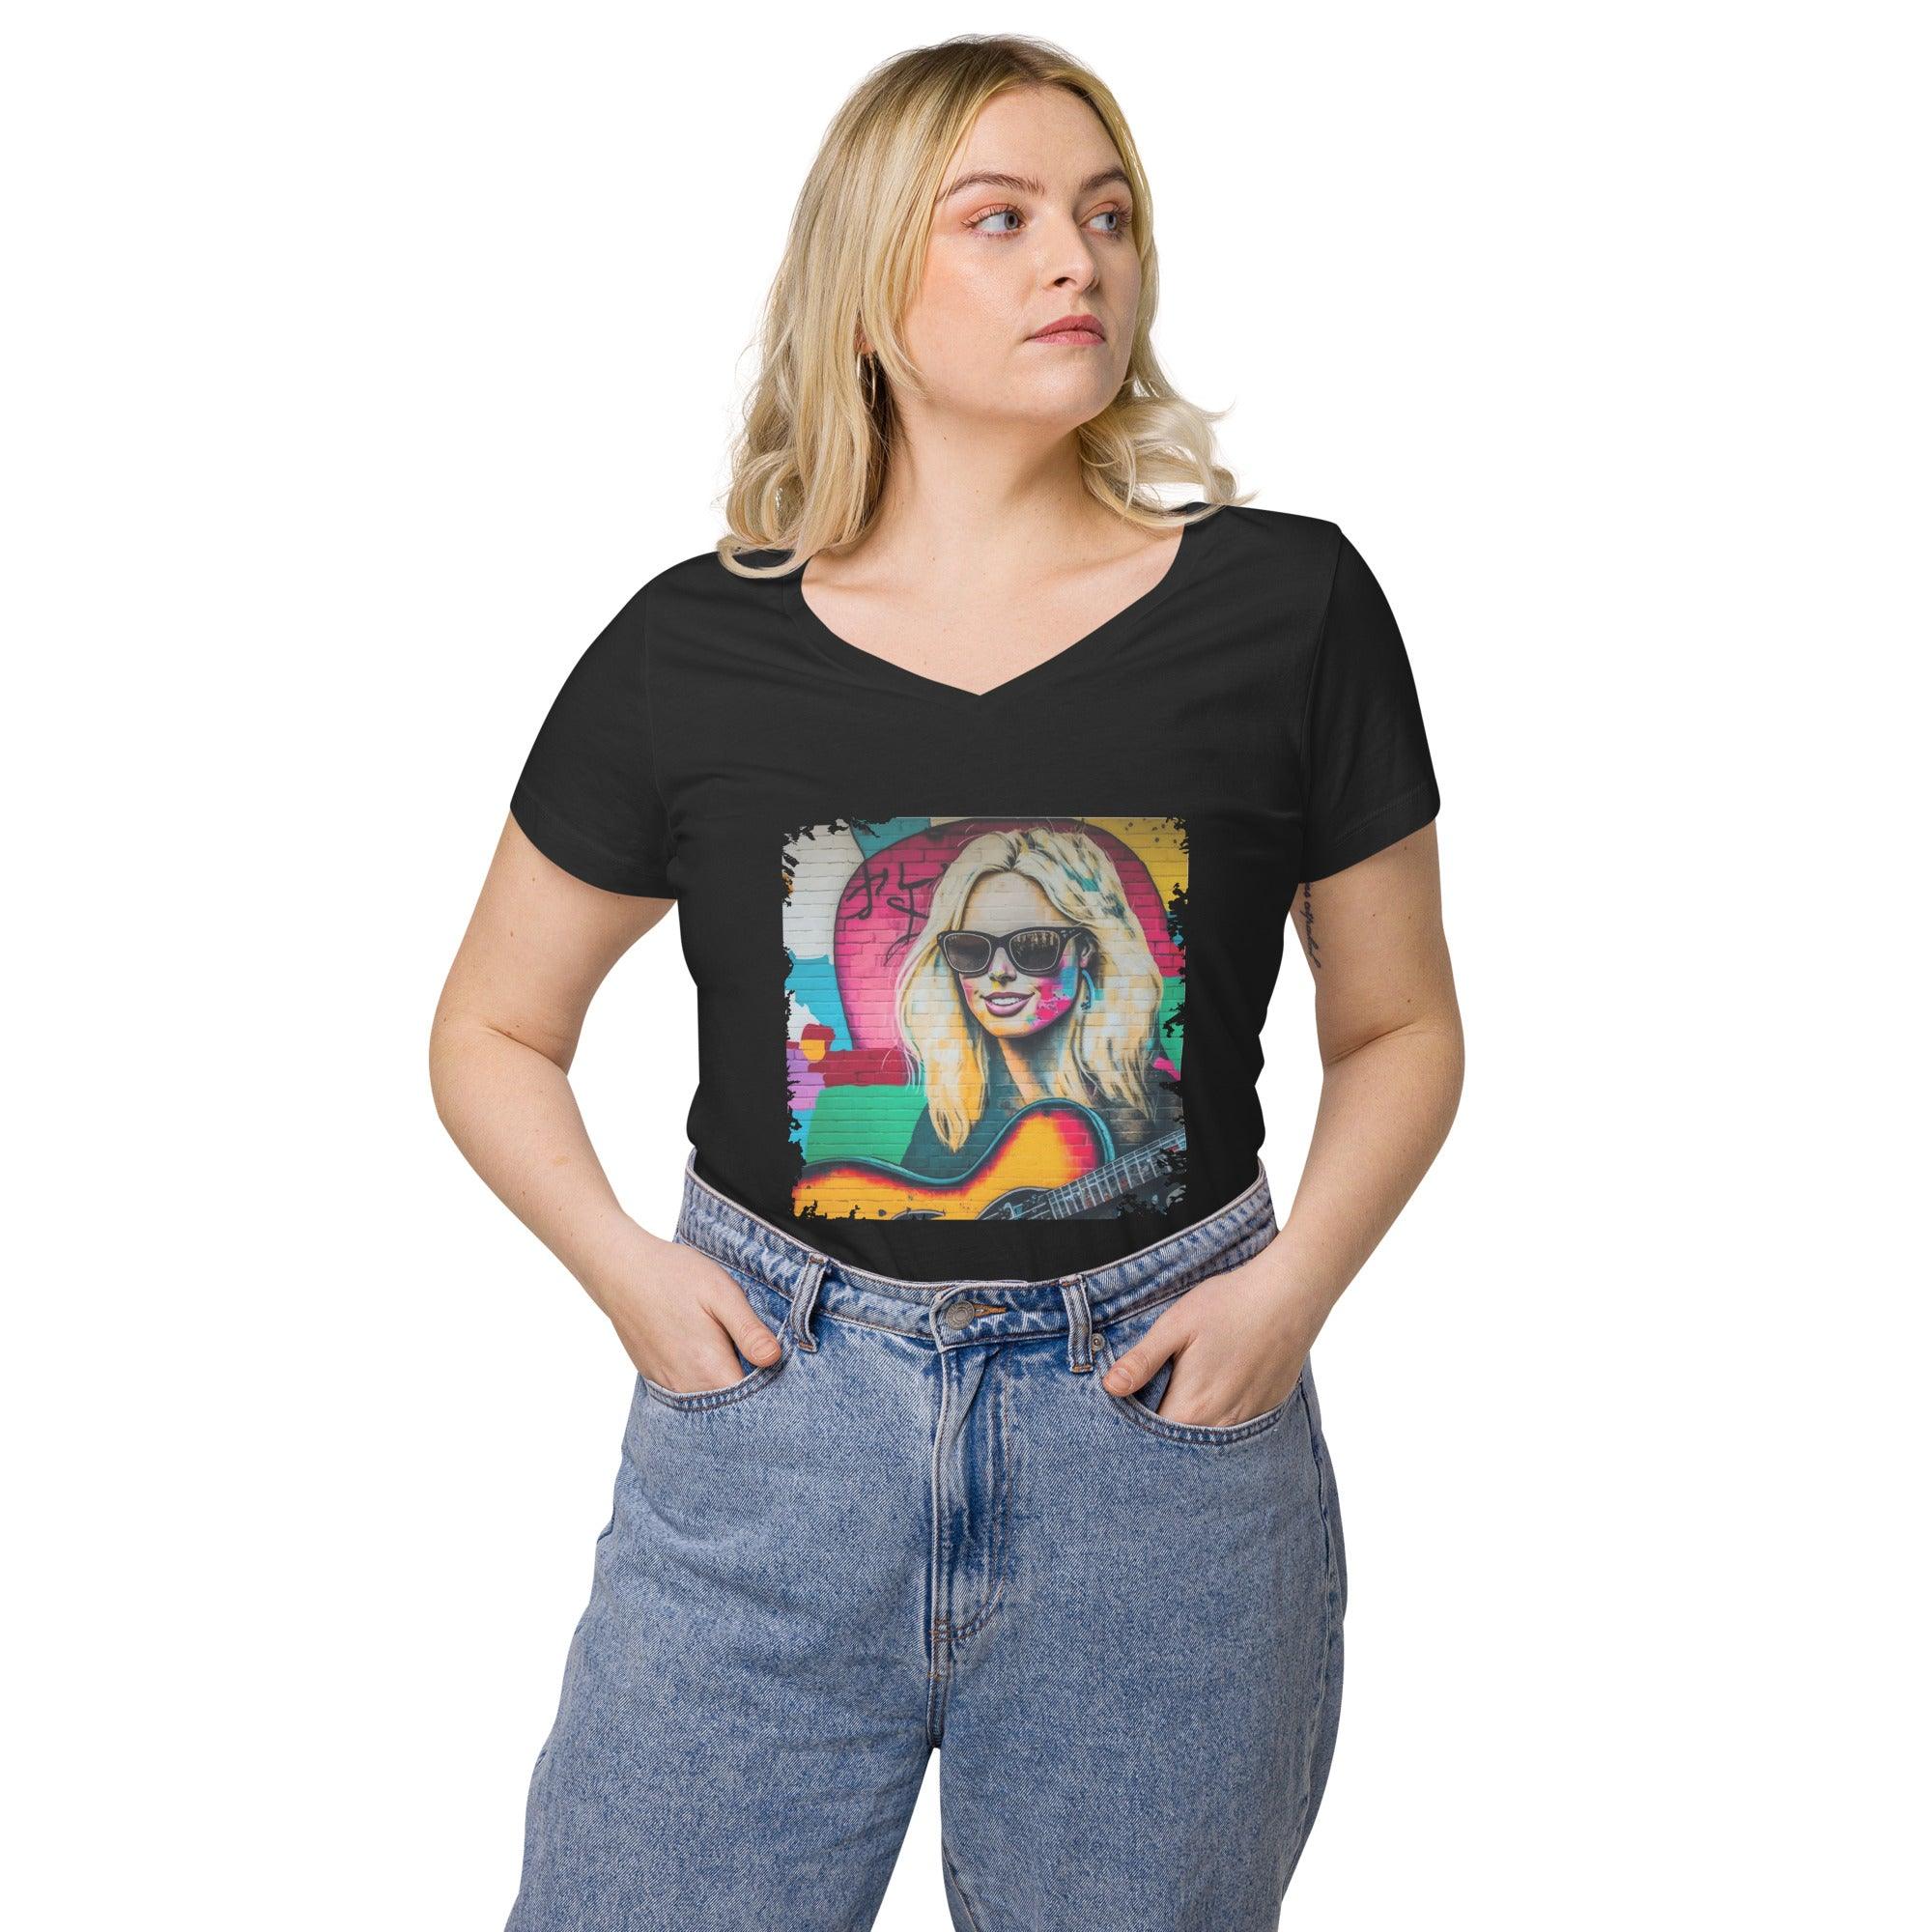 Playing With Musical Fire Women’s Fitted V-neck T-shirt - Beyond T-shirts